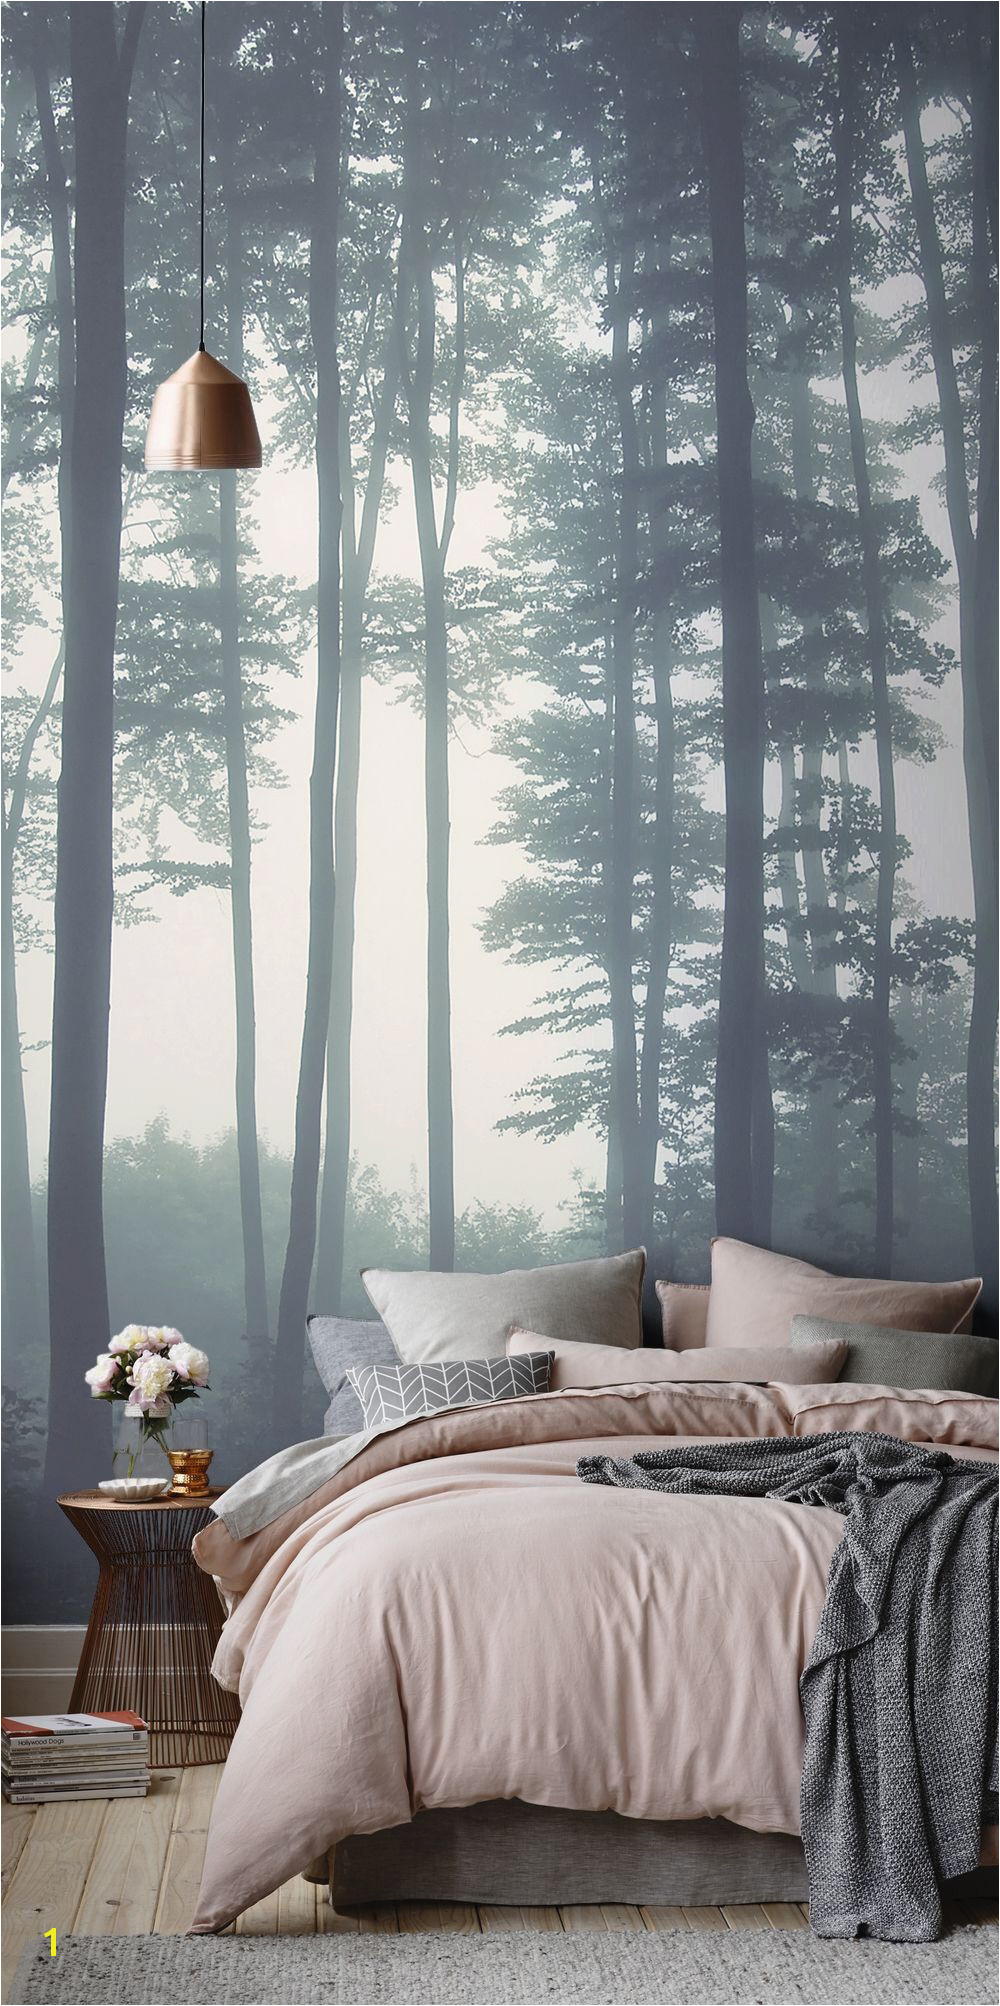 Hand Painted Wall Murals Pricing Uk Sea Of Trees forest Mural Wallpaper